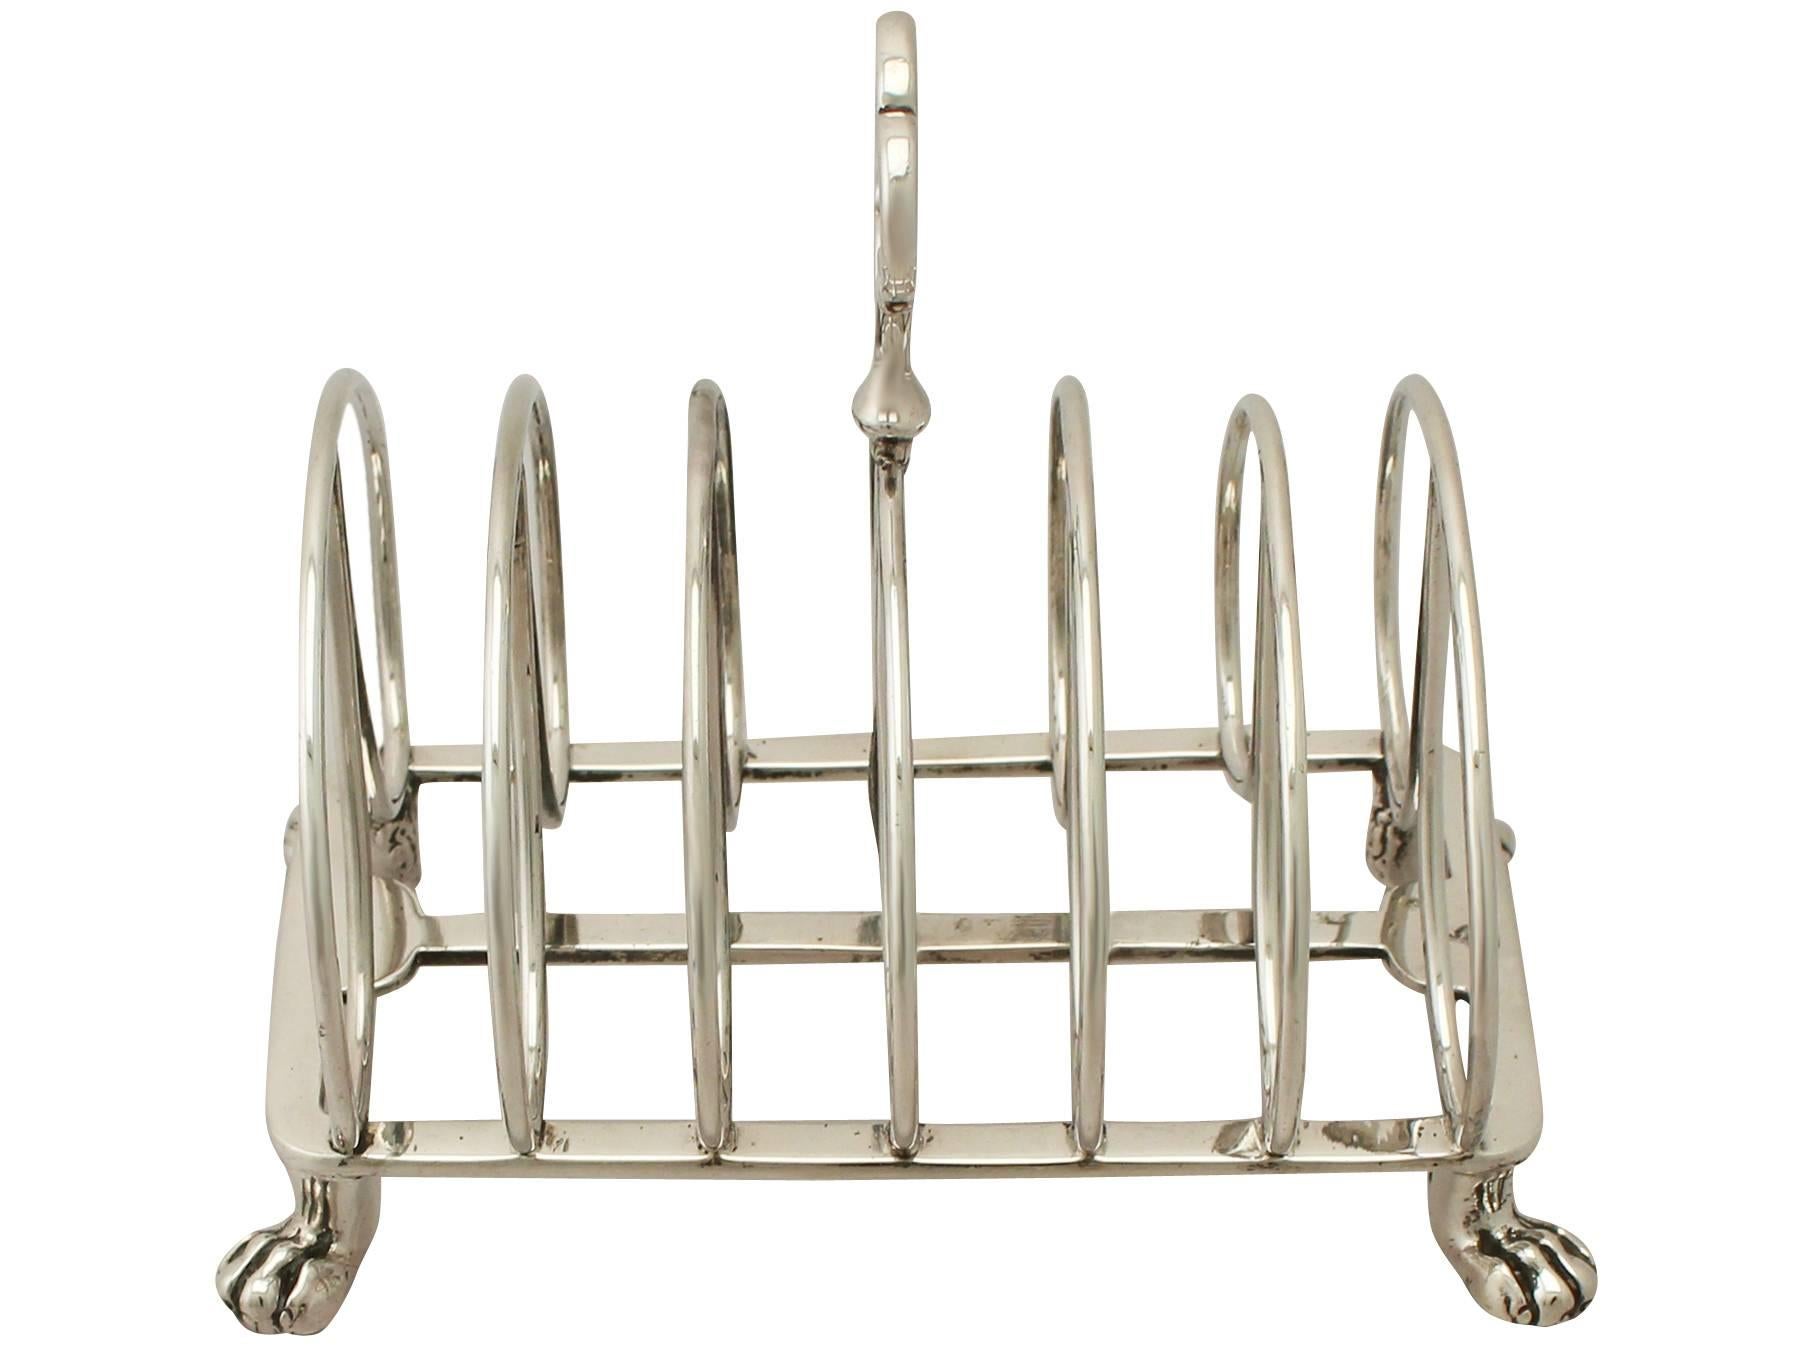 An exceptional, fine and impressive antique Victorian English sterling silver toast/letter rack, an addition to our dining silverware collection.

This exceptional antique Victorian sterling silver toast rack has a rounded sub-lobed form.

The